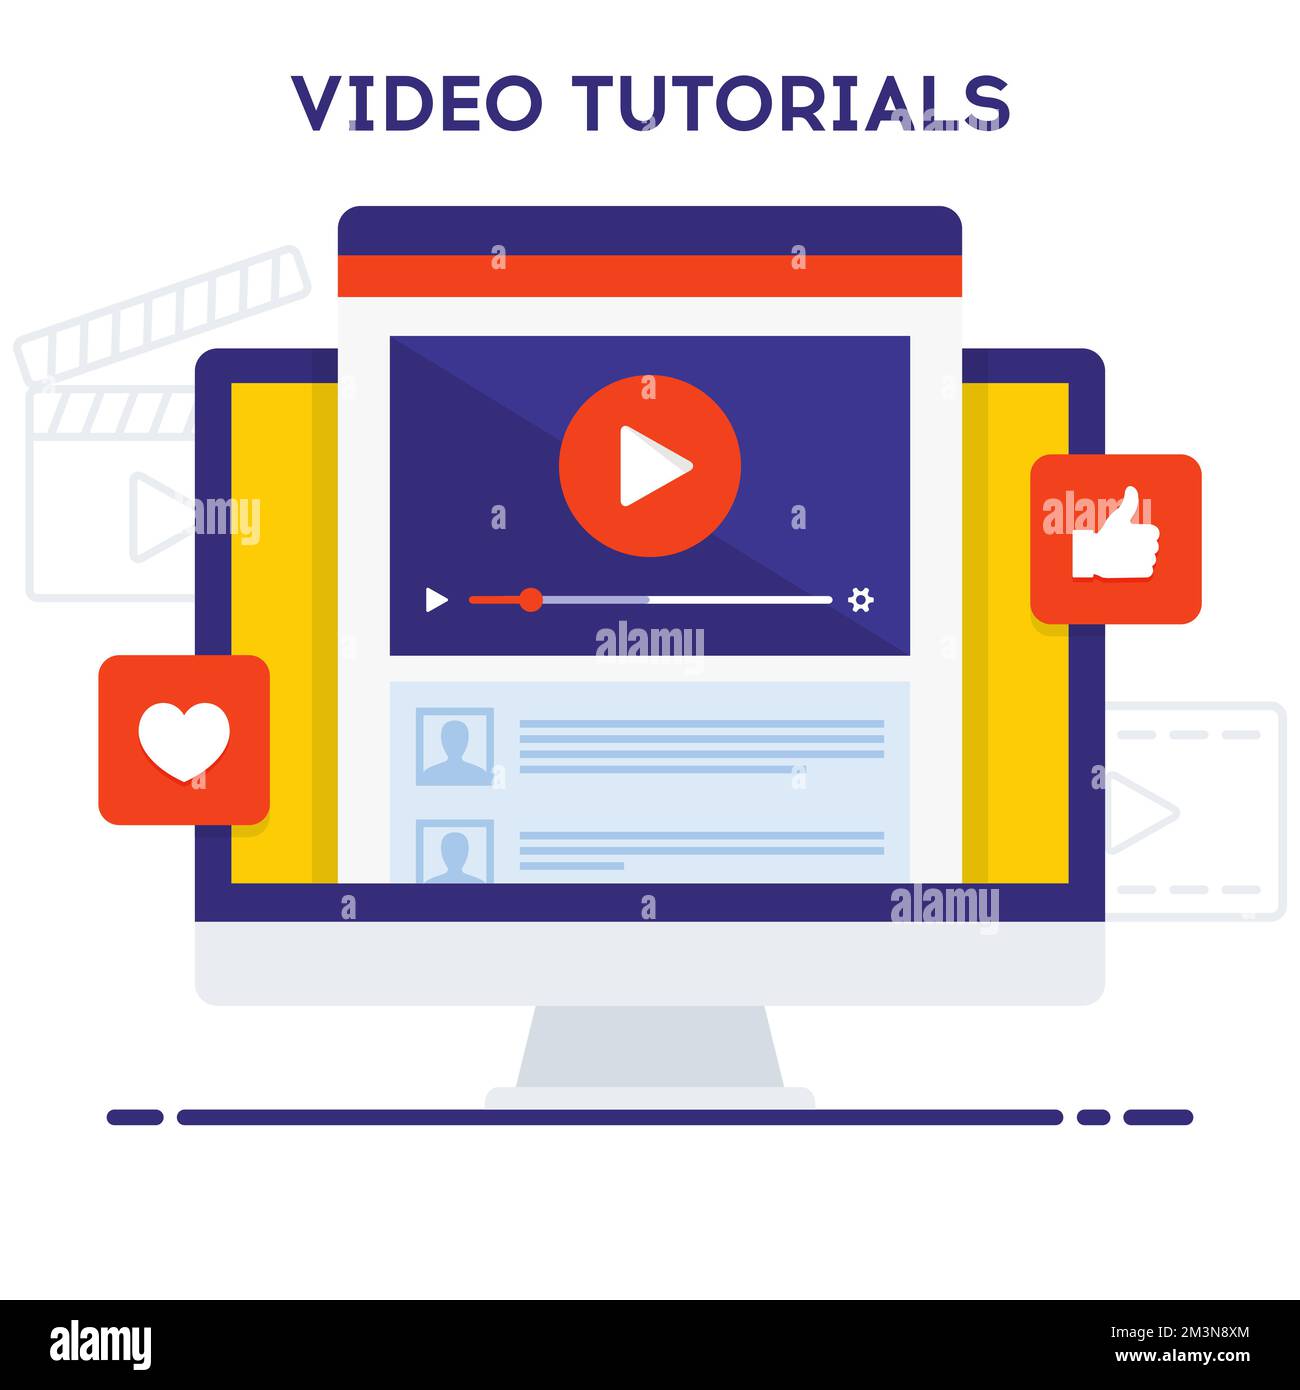 Video tutorials icon concept. Online webinar icon design. Study and learning background. Digital lesson illustration. Vector illustration Stock Vector